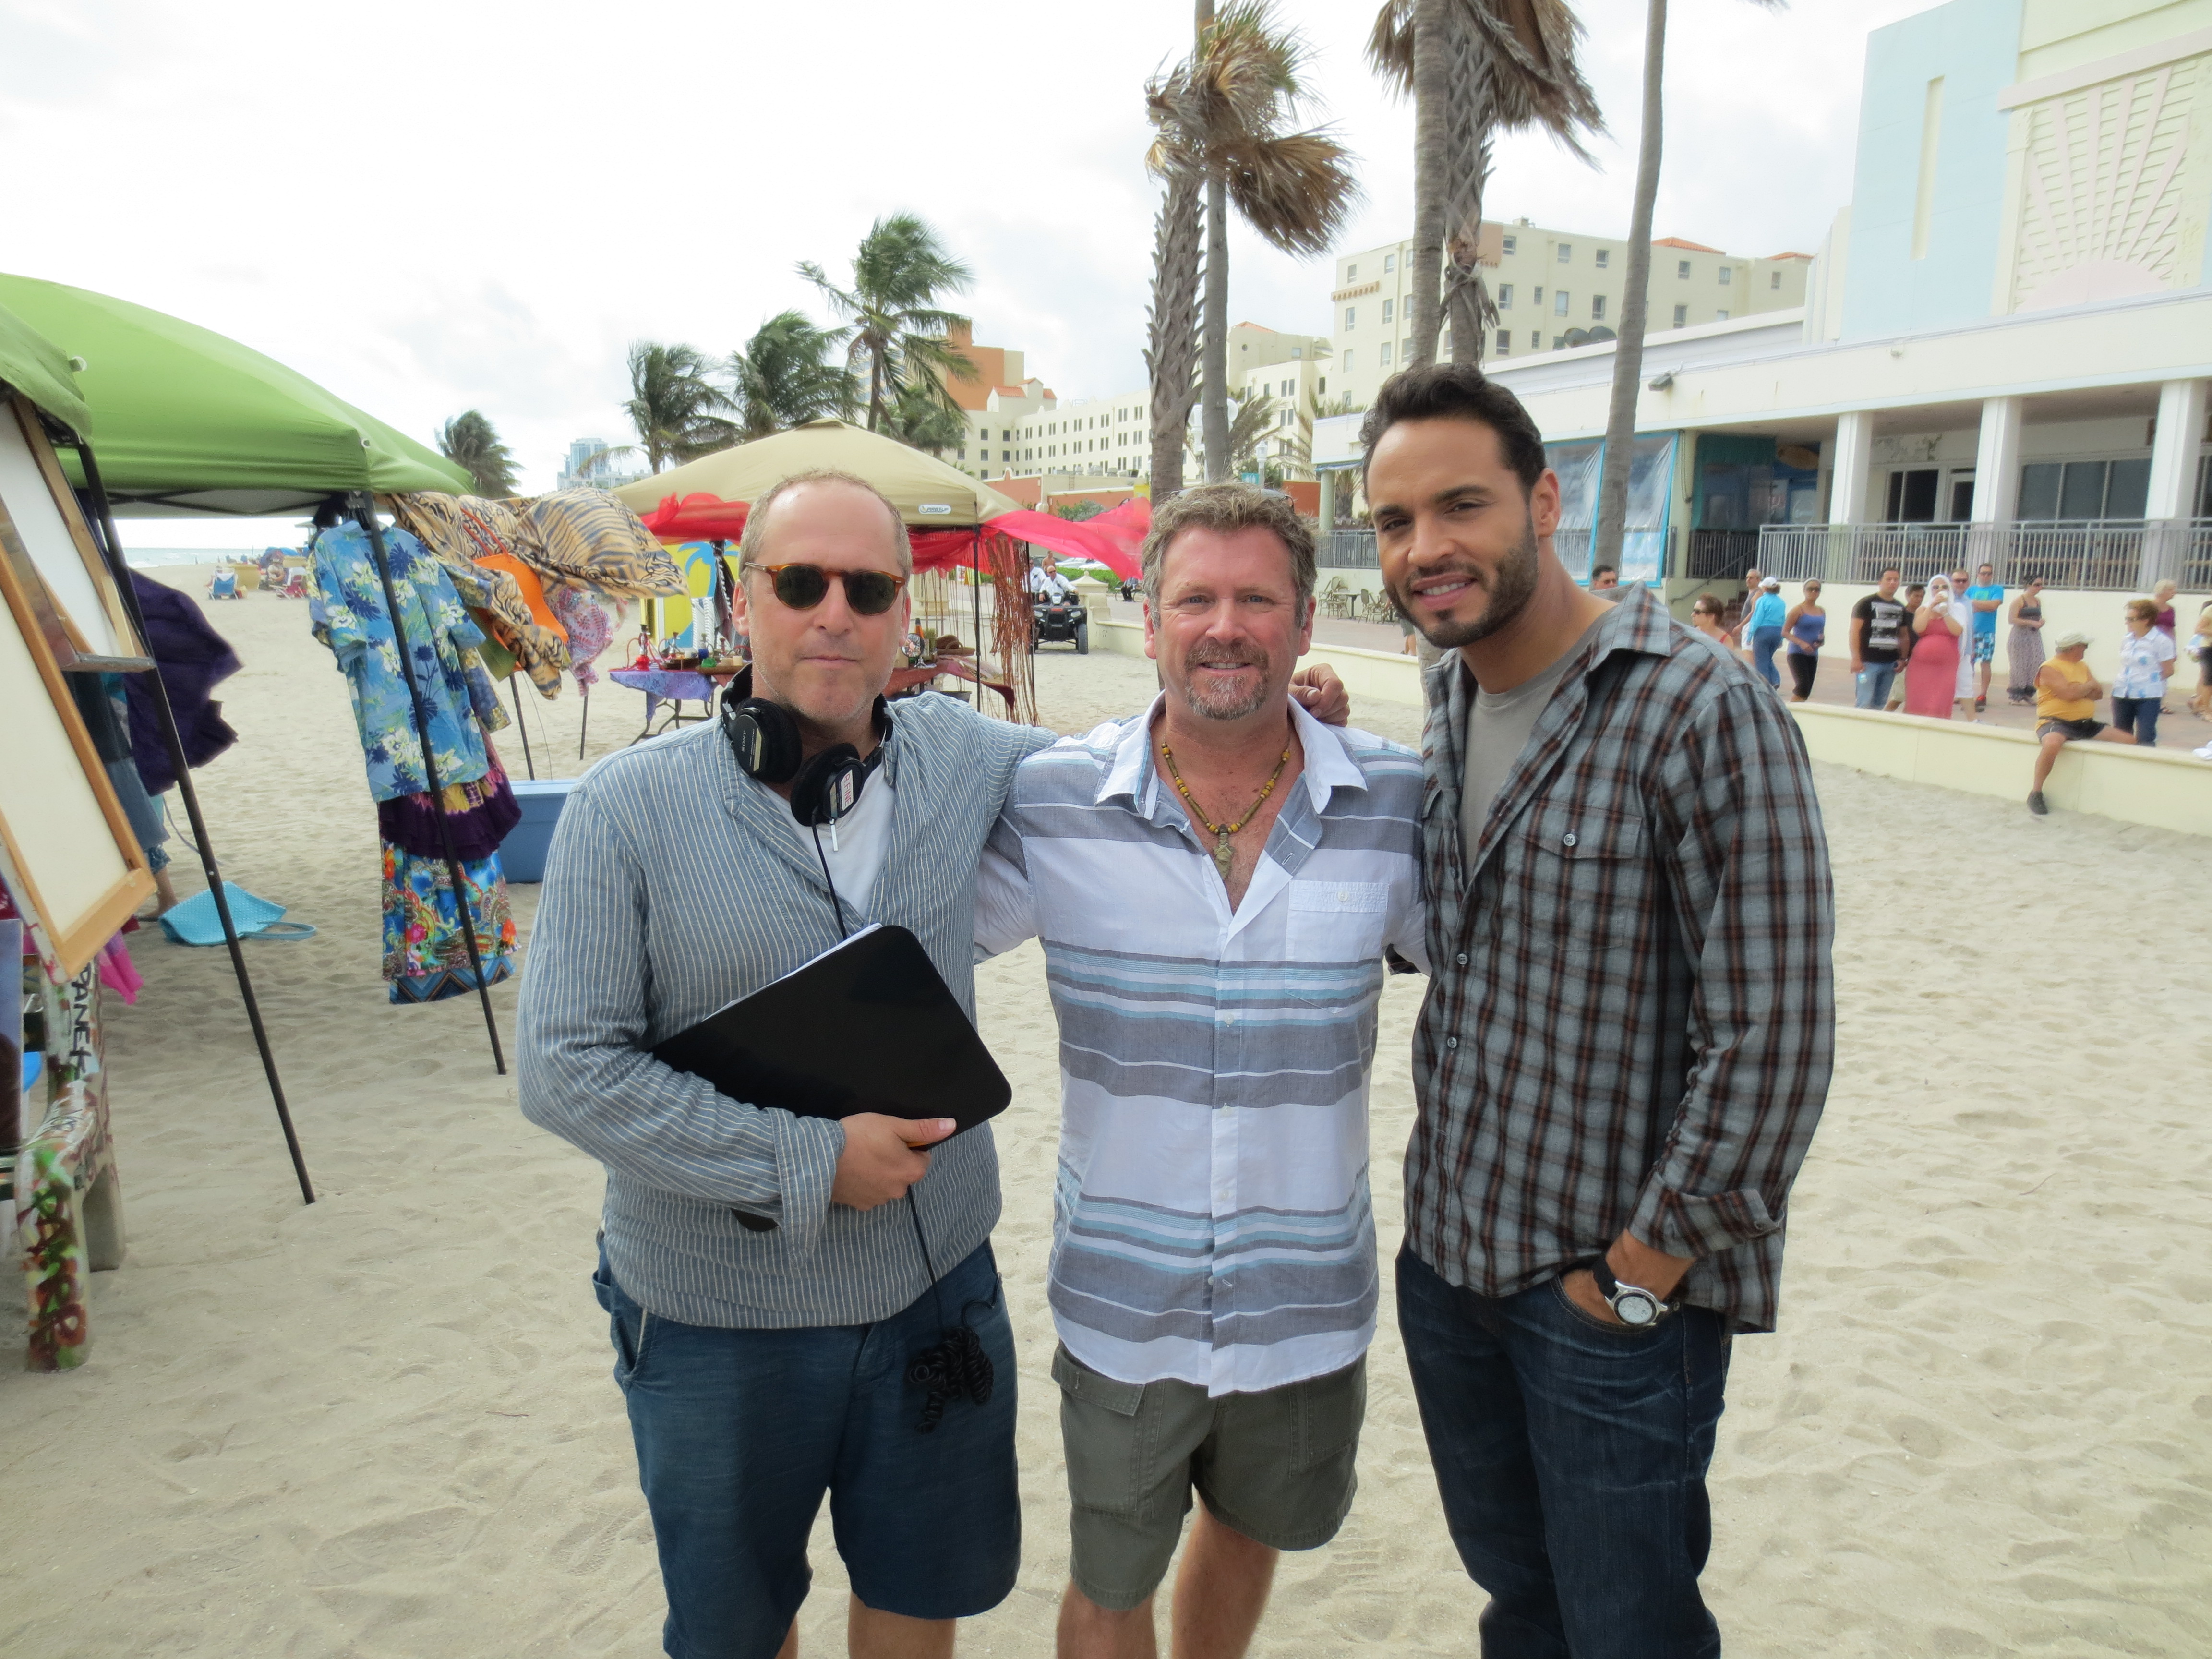 Tony Senzamici on the set of the USA network show Graceland with director Russell Fine and Daniel Sunjata.